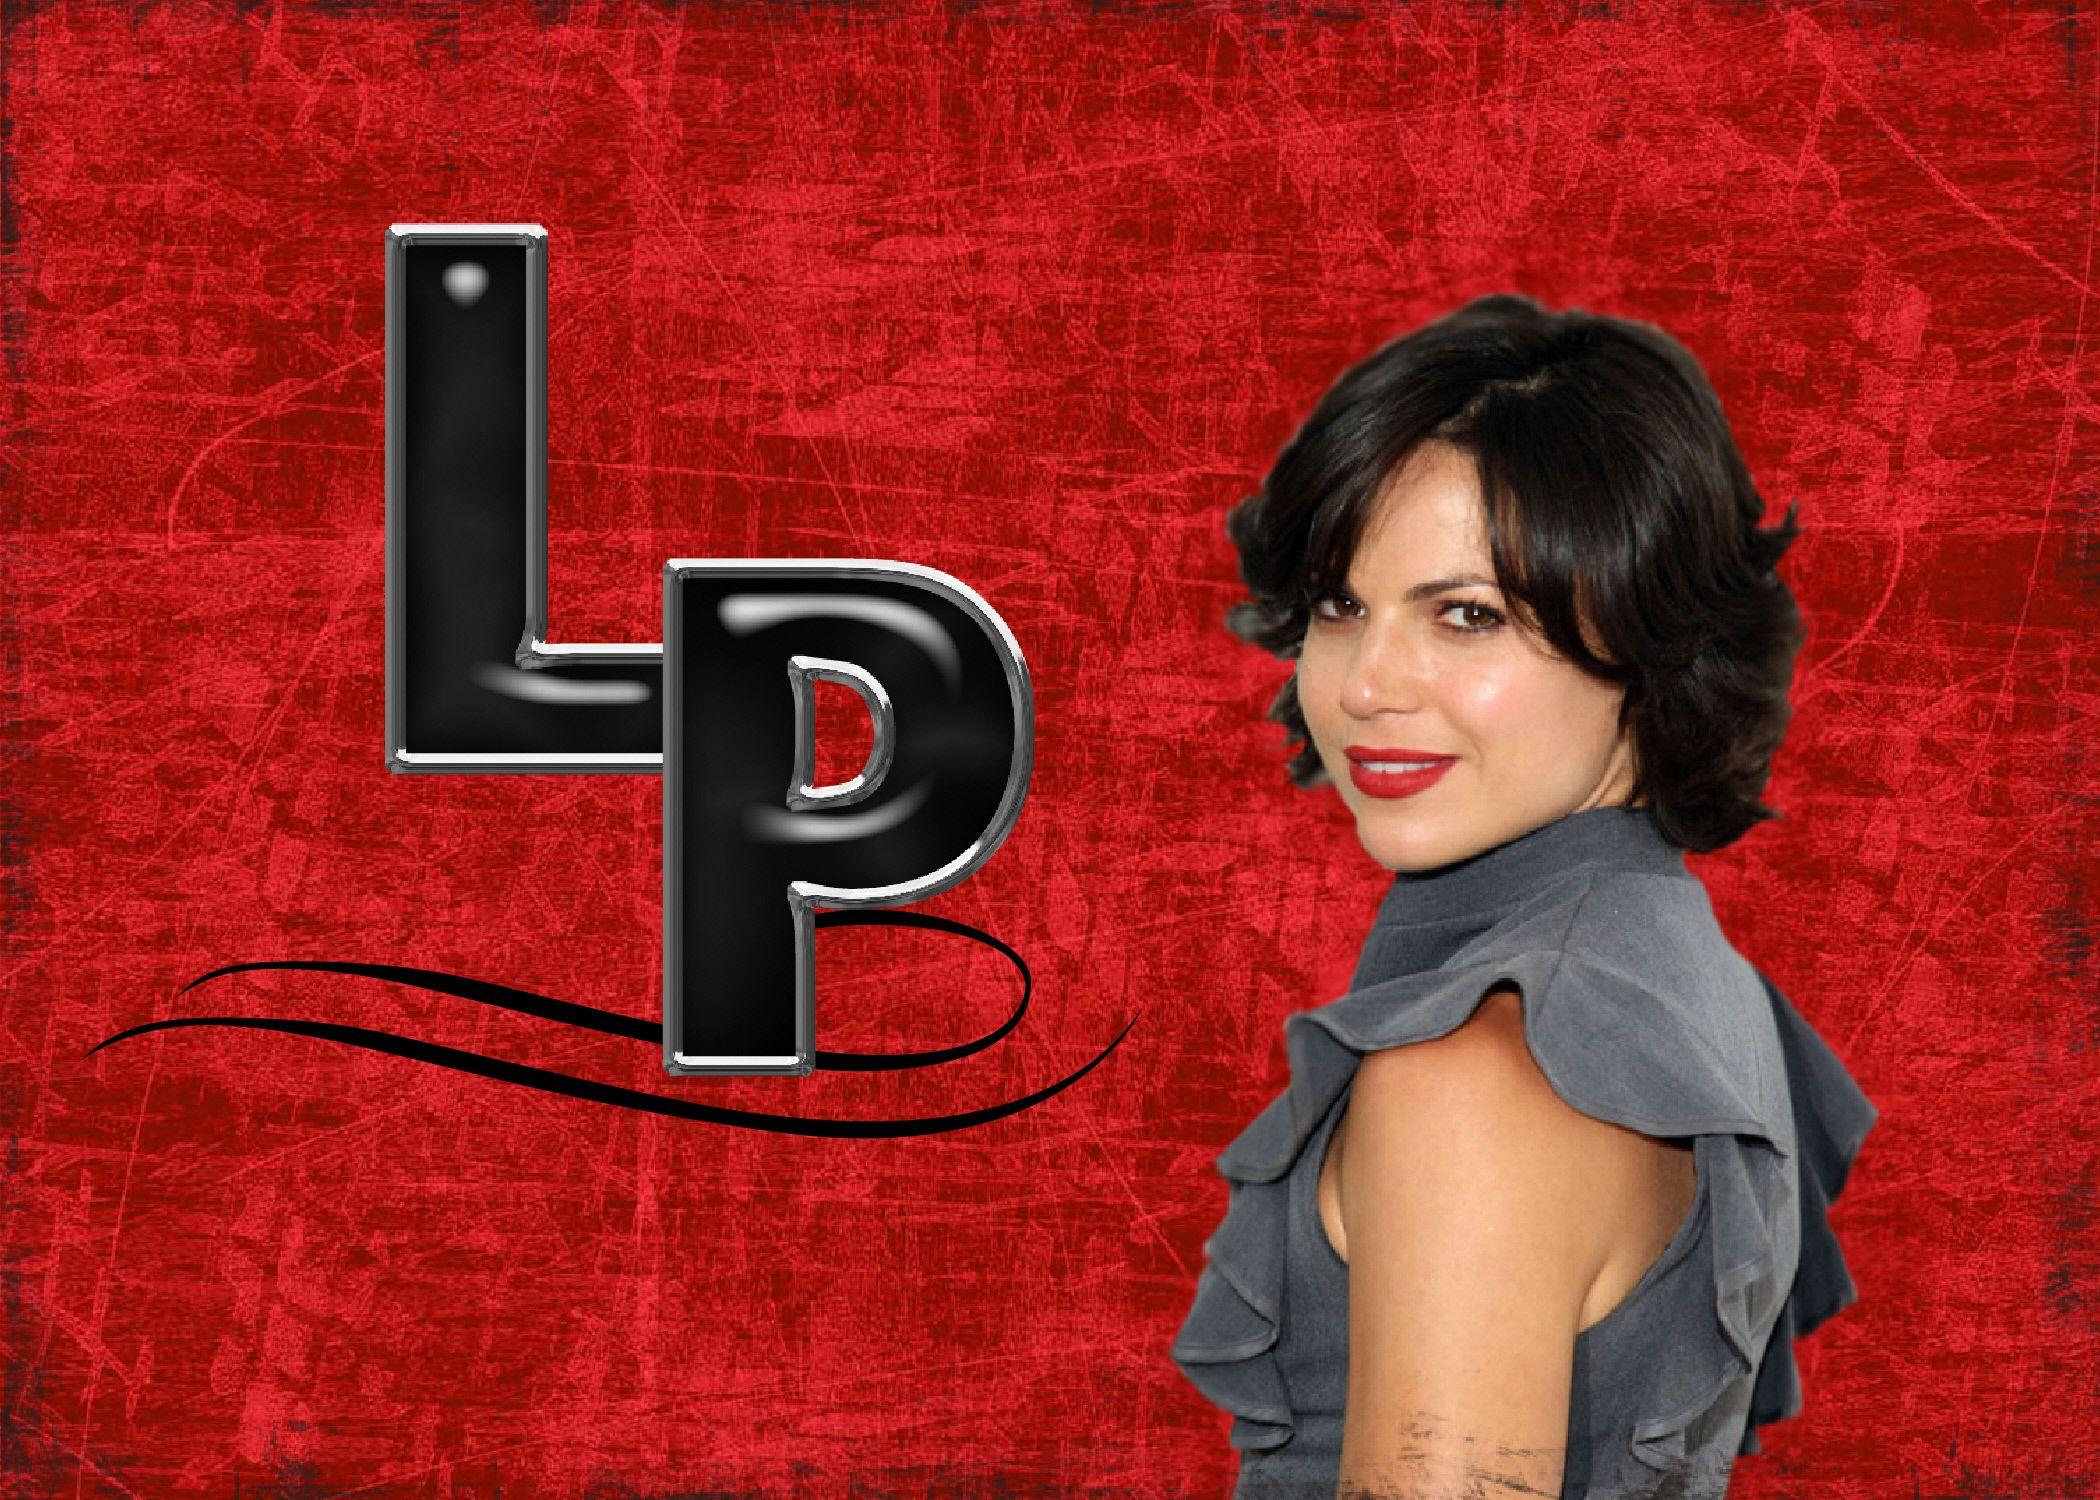 Lana Parrilla image LP Red HD wallpaper and background photo